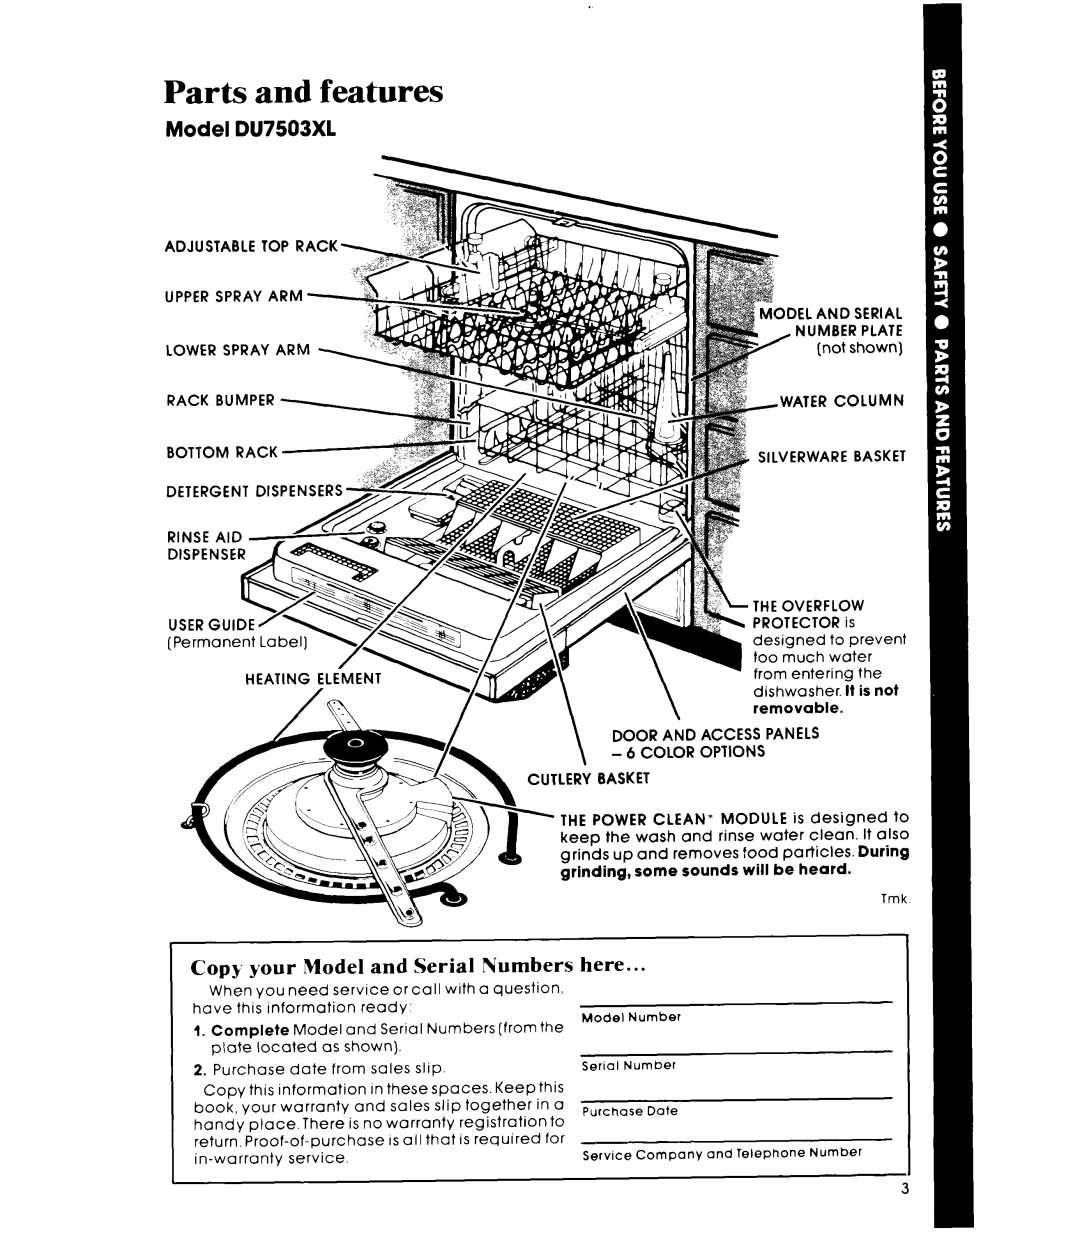 Whirlpool manual Parts and features, Model DU7503XL, Copy your Model and Serial Numbers here 